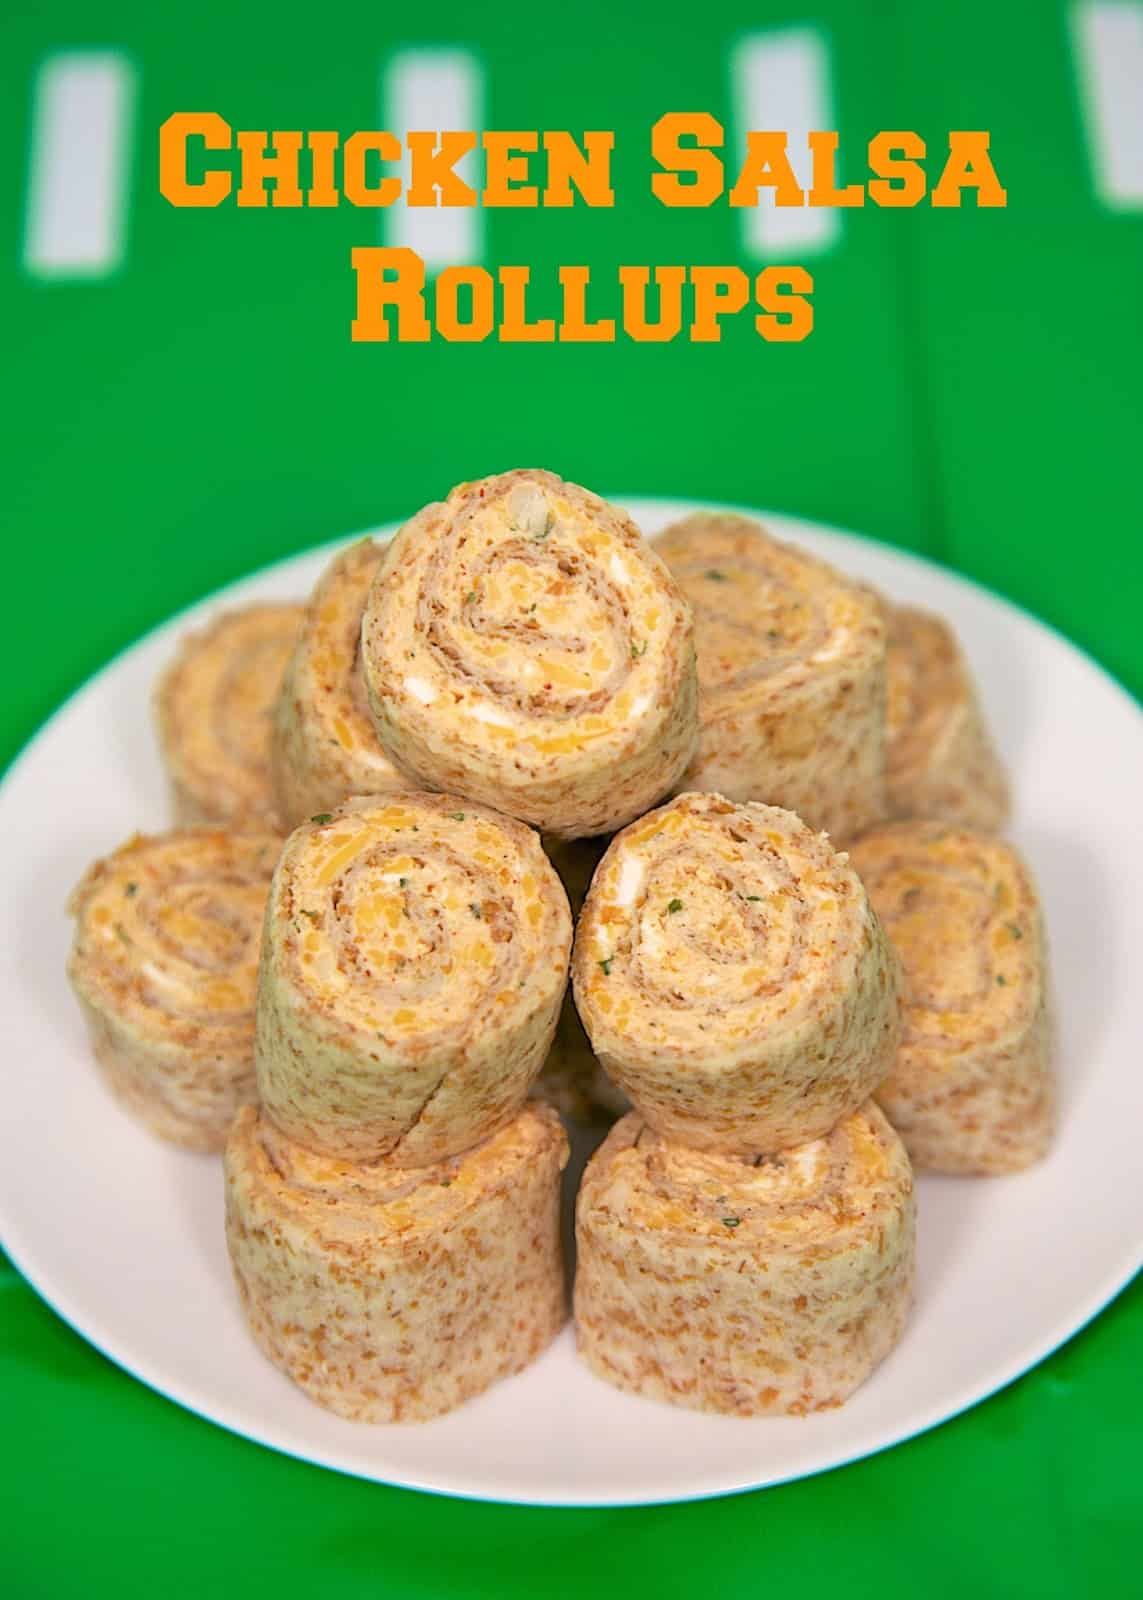 Chicken Salsa Rollups - LOVE these easy tortilla sandwich pinwheels! Chicken, cream cheese, salsa and cheddar cheese wrapped in tortillas and cut into slices. Can make ahead and refrigerate until ready to serve. Great for parties or an easy lunch or dinner!